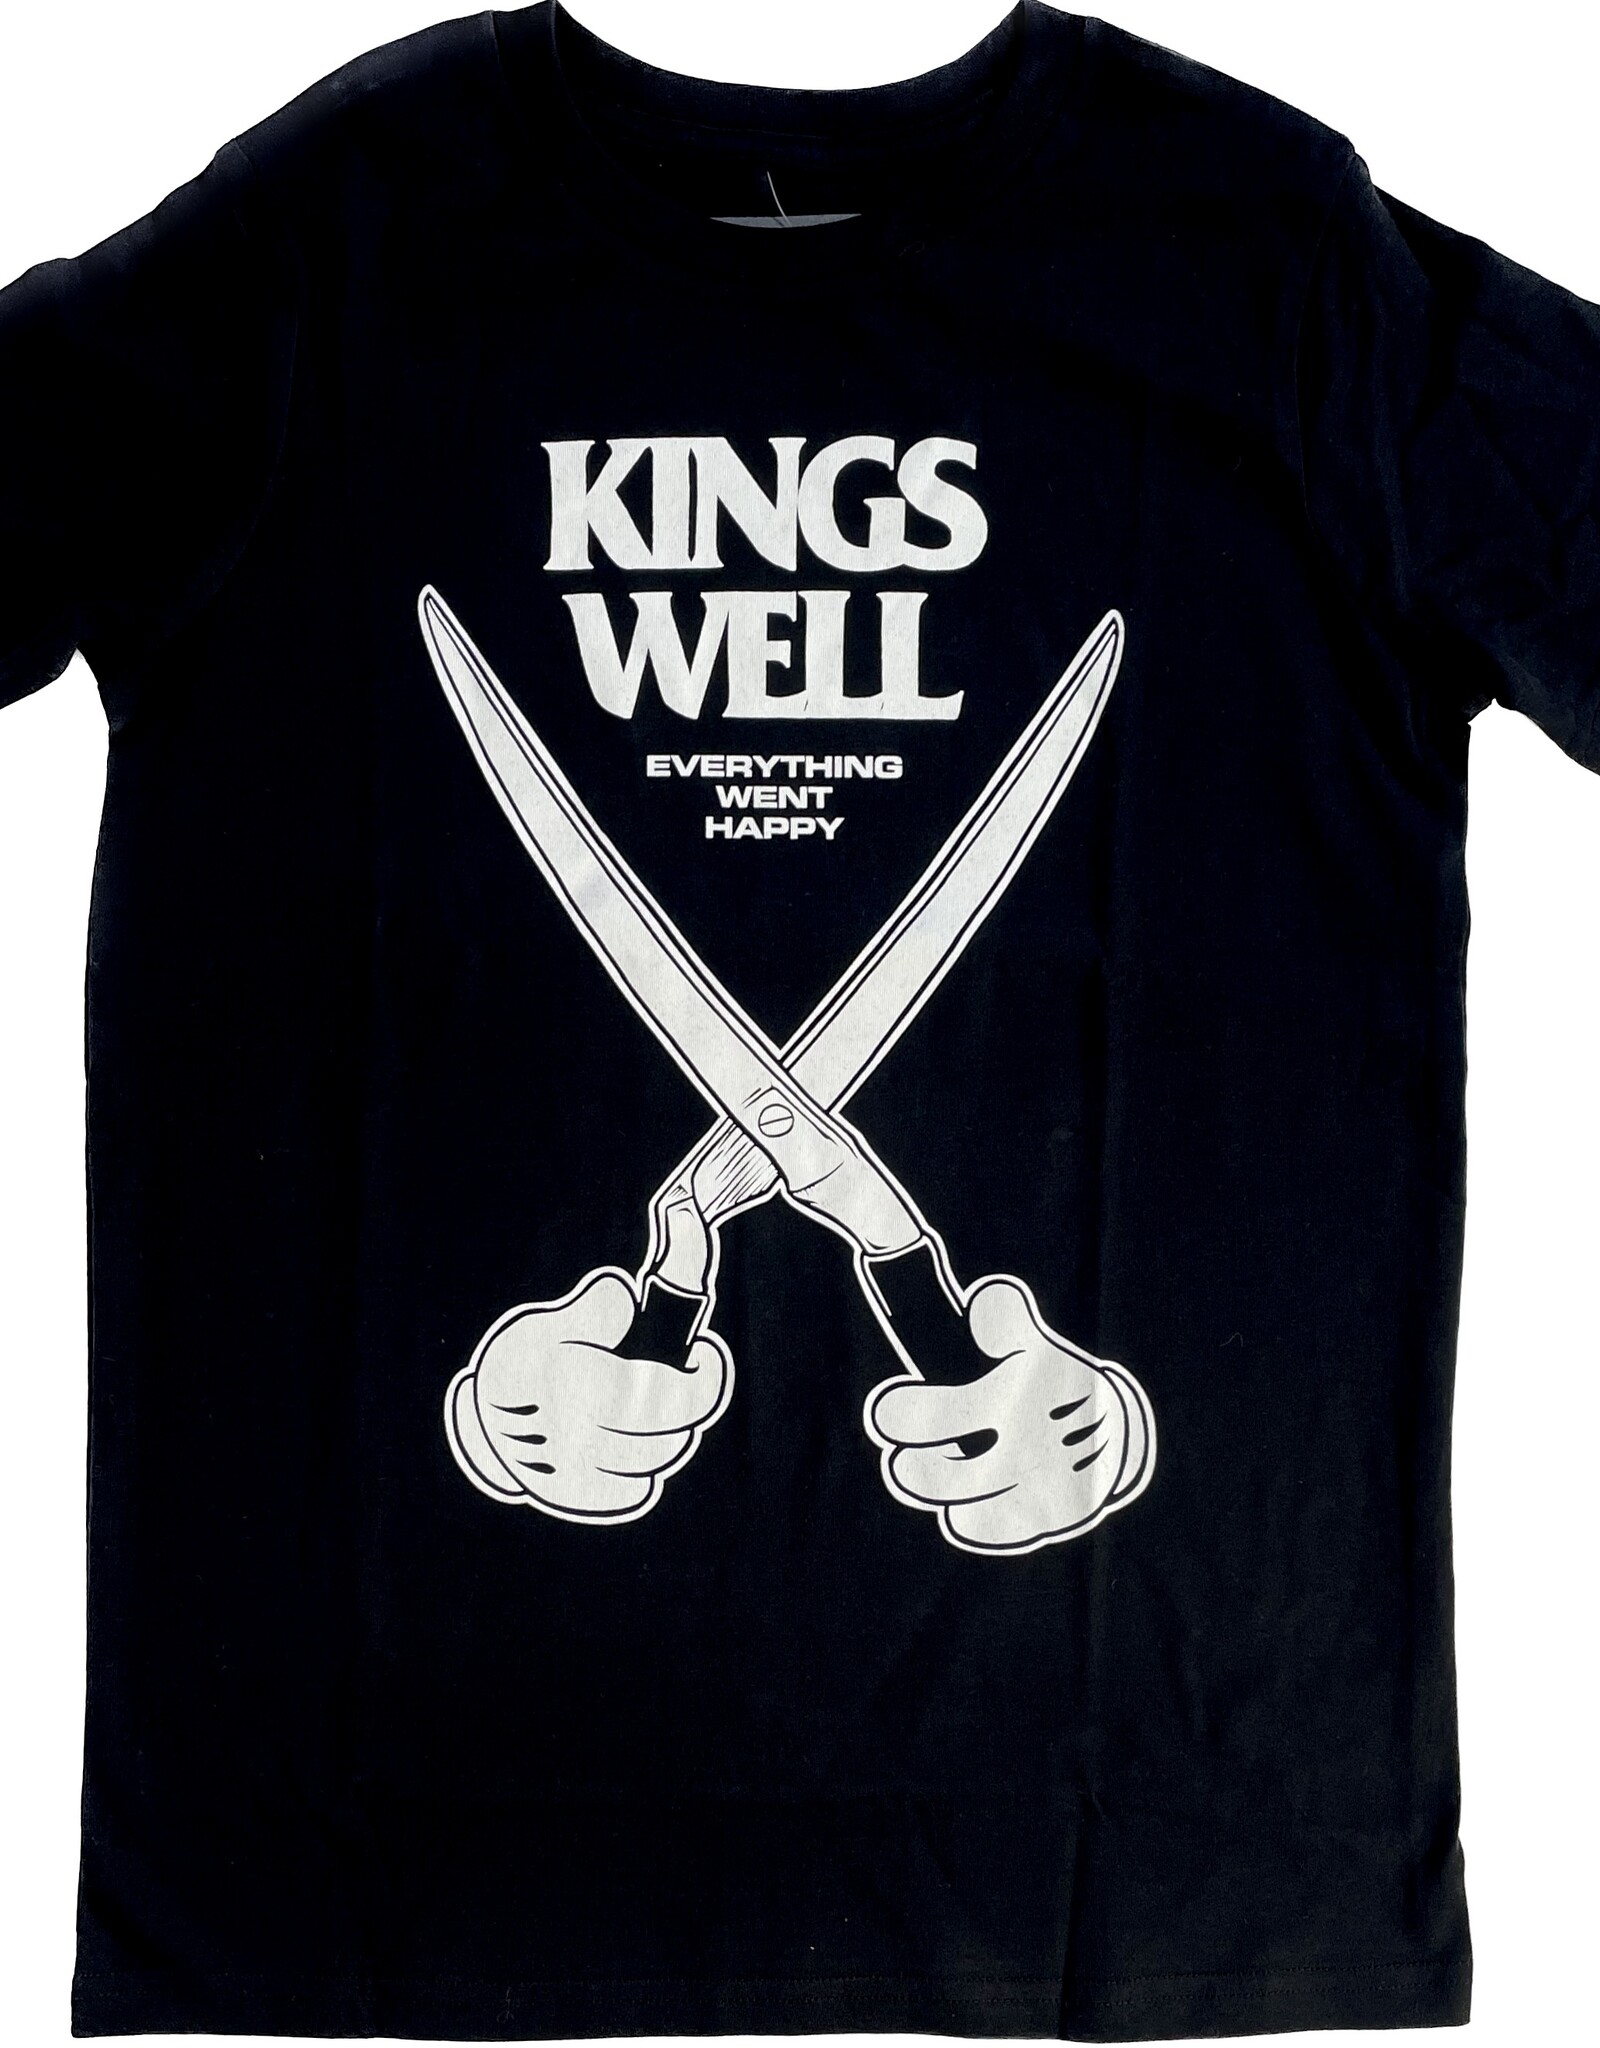 KINGSWELL KINGSWELL YOUTH BLACKWELL S/S TEE - BLACK